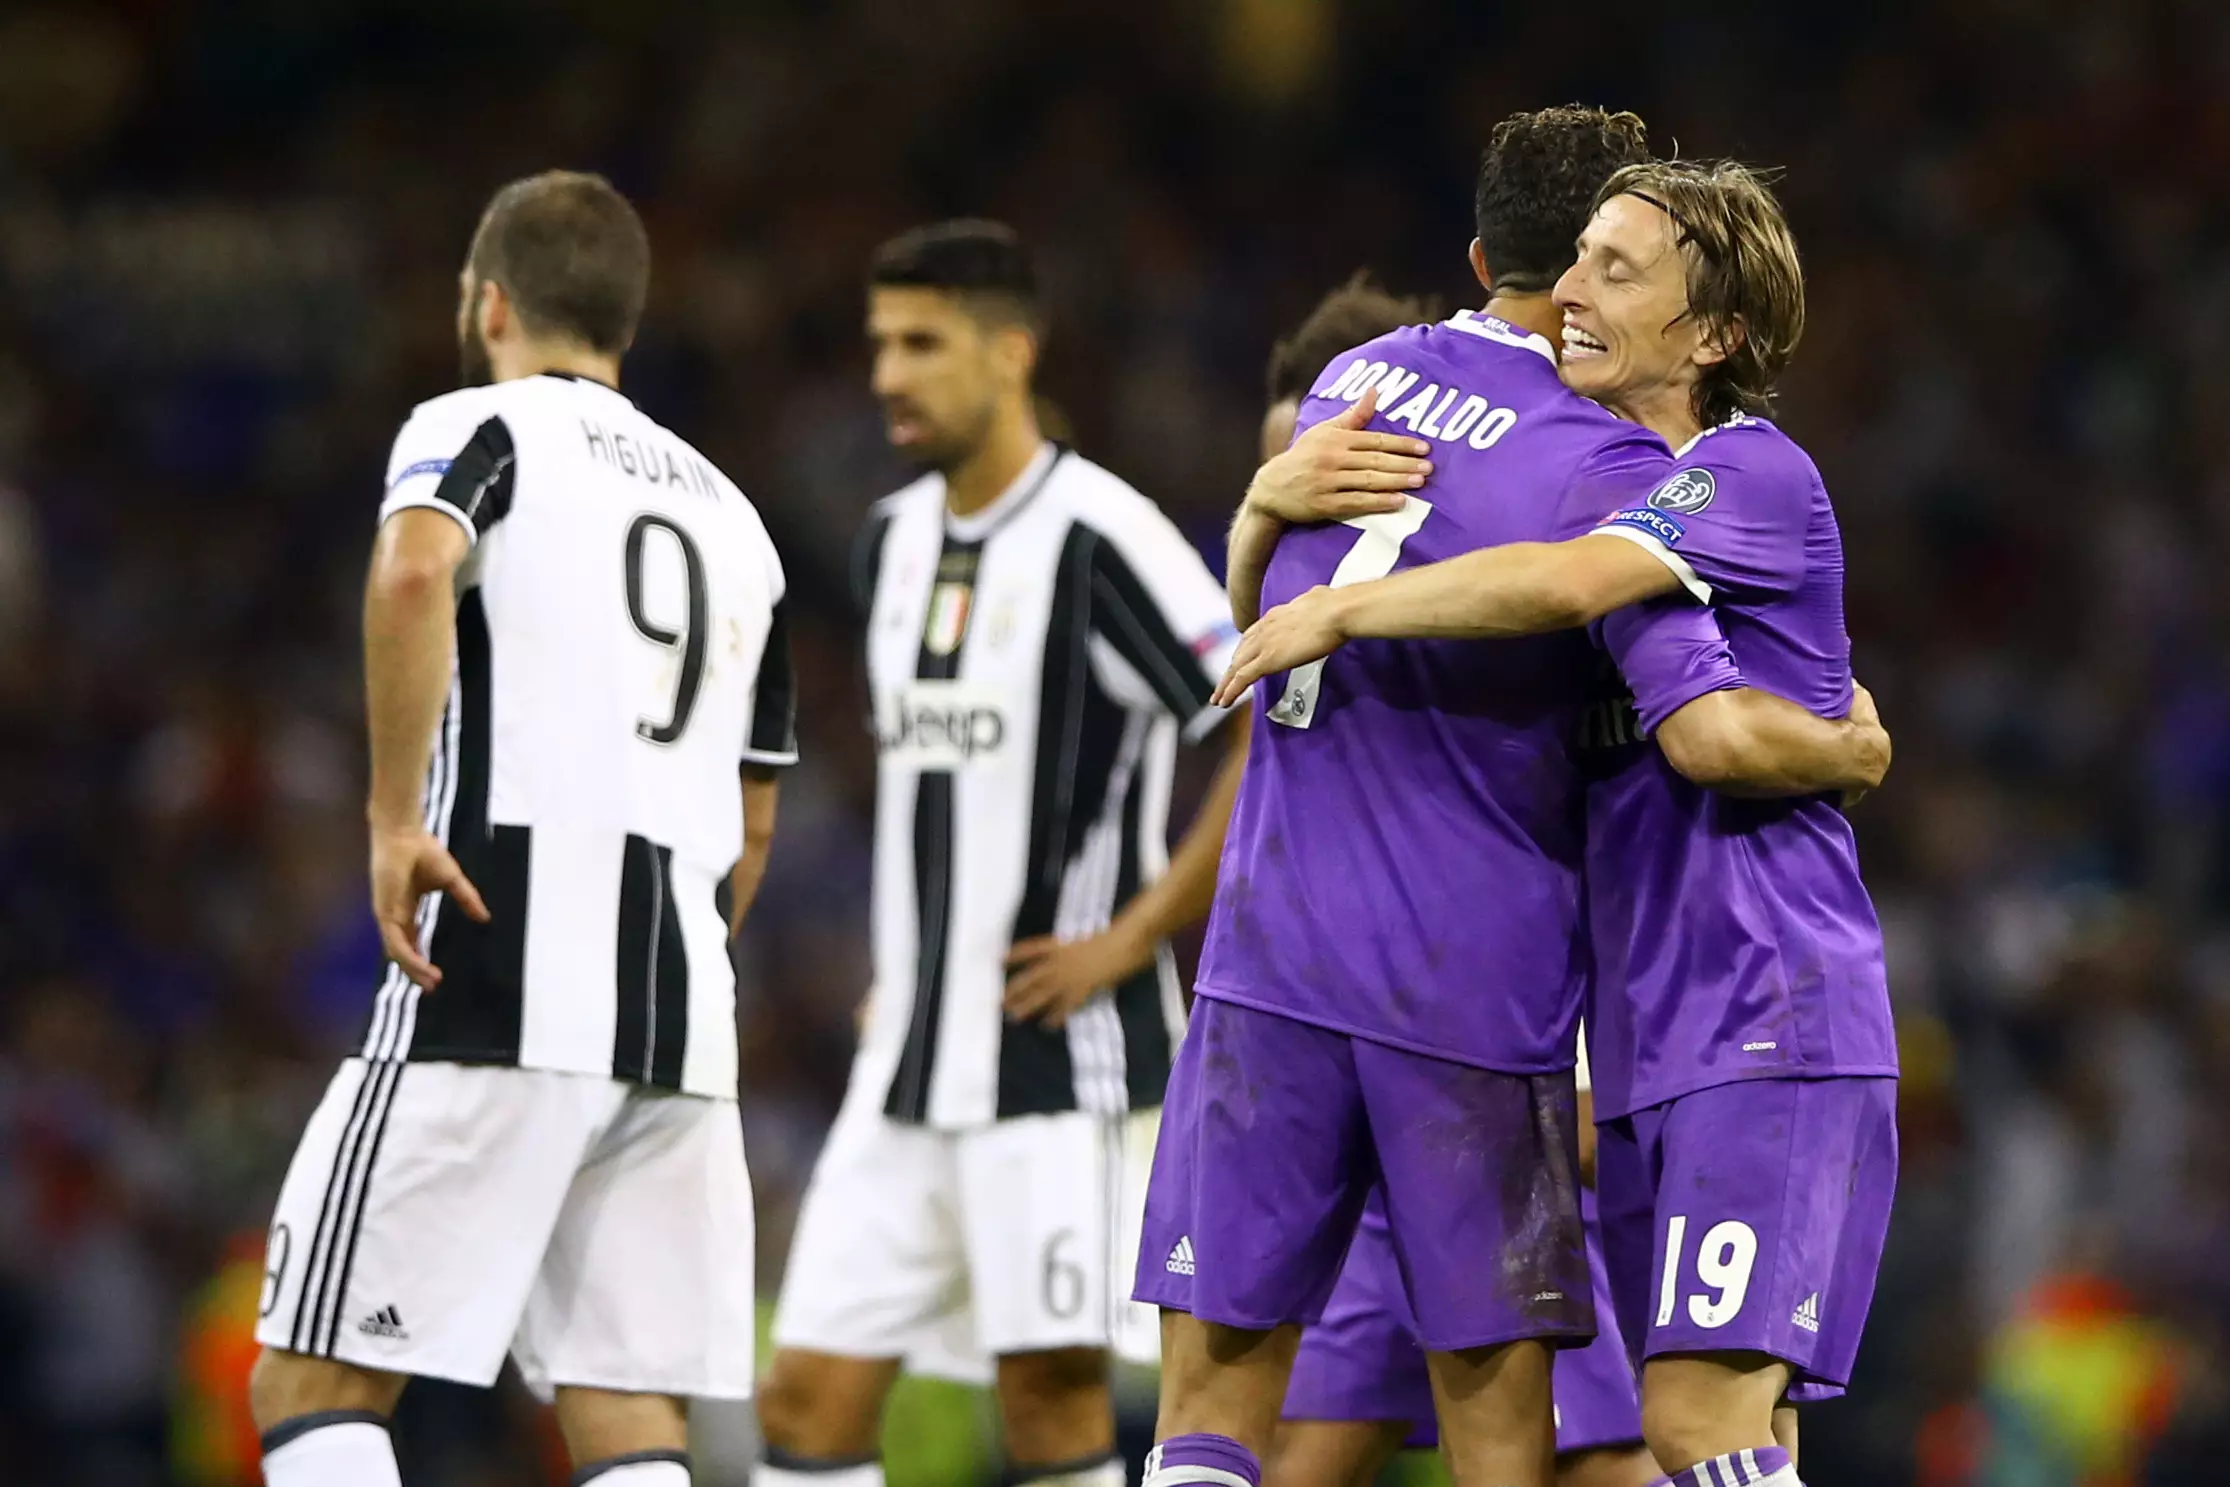 Juve will hope they're on the right side of Ronaldo's success in the near future. Image: PA Images